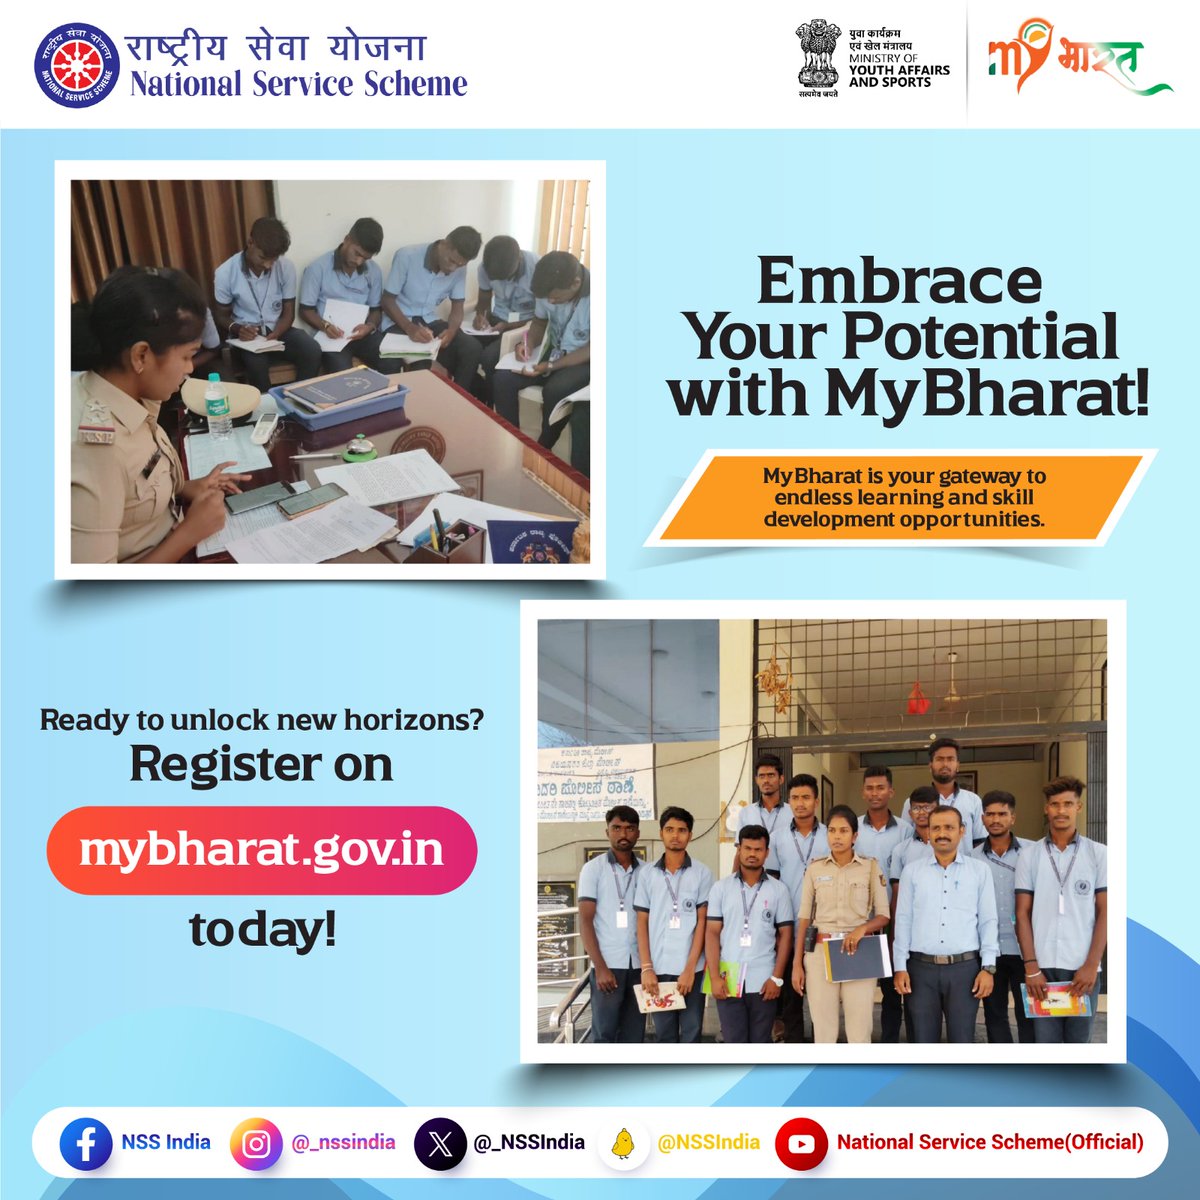 A Call for Youth to Rise, Learn, and Lead in India's Skill Development Journey. Register on mybharat.gov.in today! #mybharat #mybharatregistration